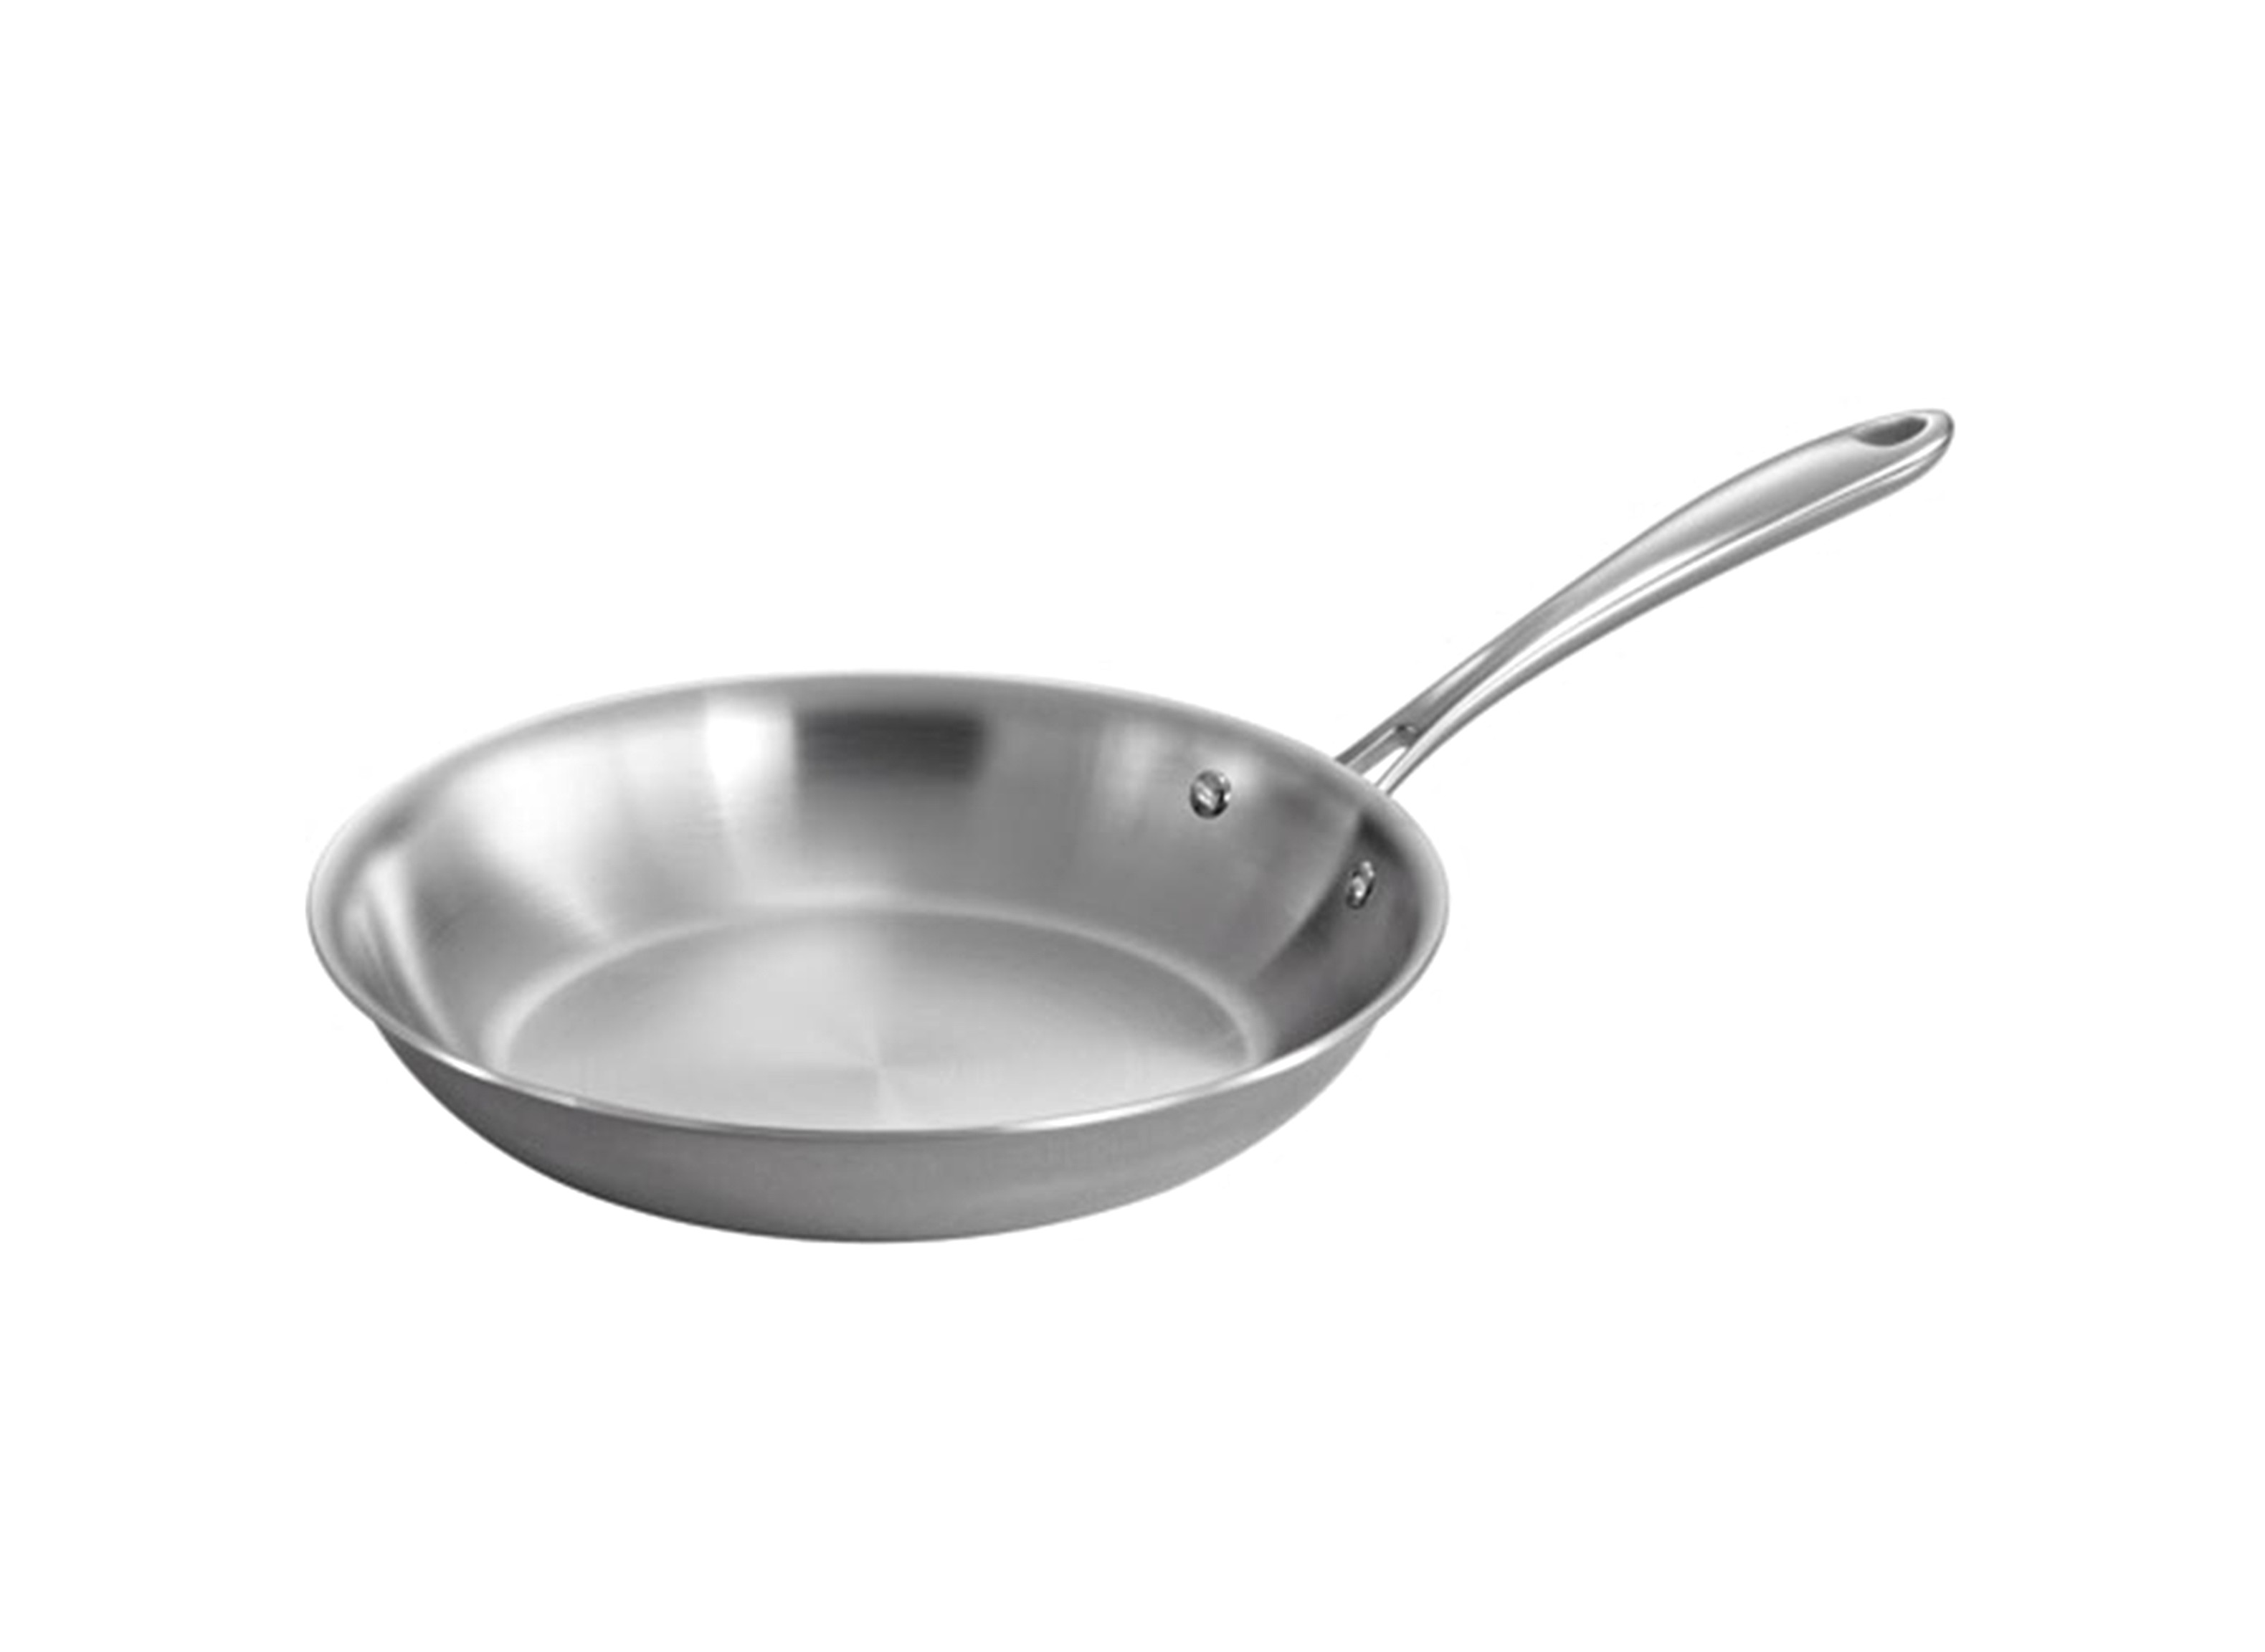 All-Clad Stainless-Steel Cookware Review - Consumer Reports